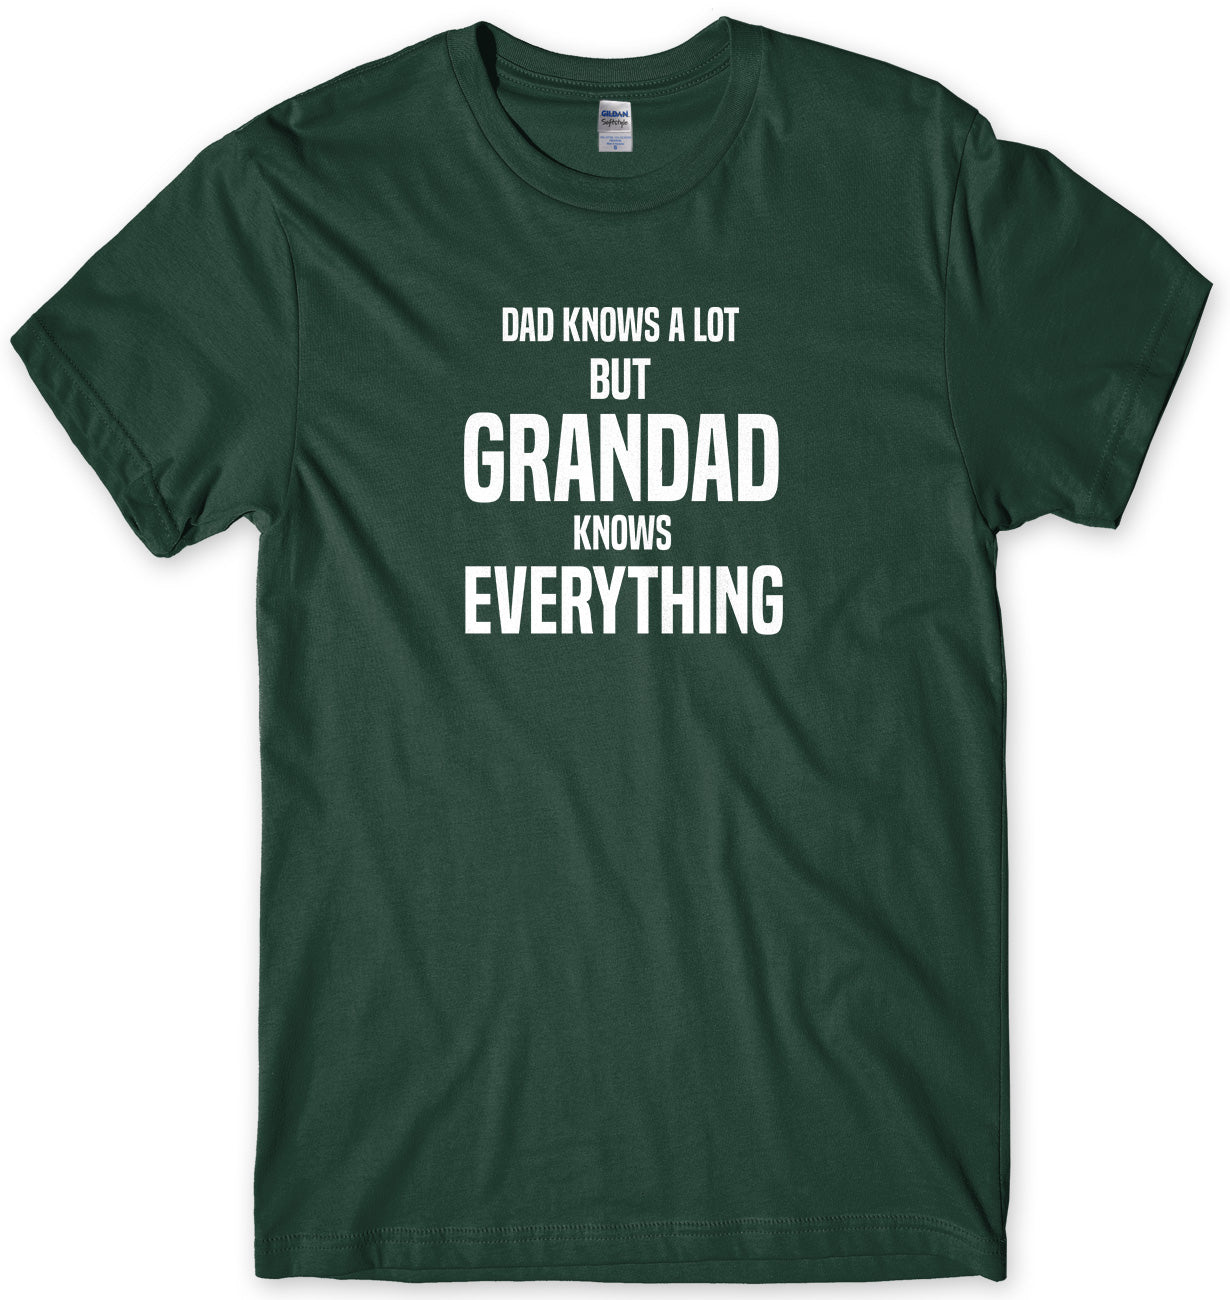 DAD KNOWS A LOT BUT GRANDAD KNOWS EVERYTHING MENS FUNNY SLOGAN UNISEX T-SHIRT